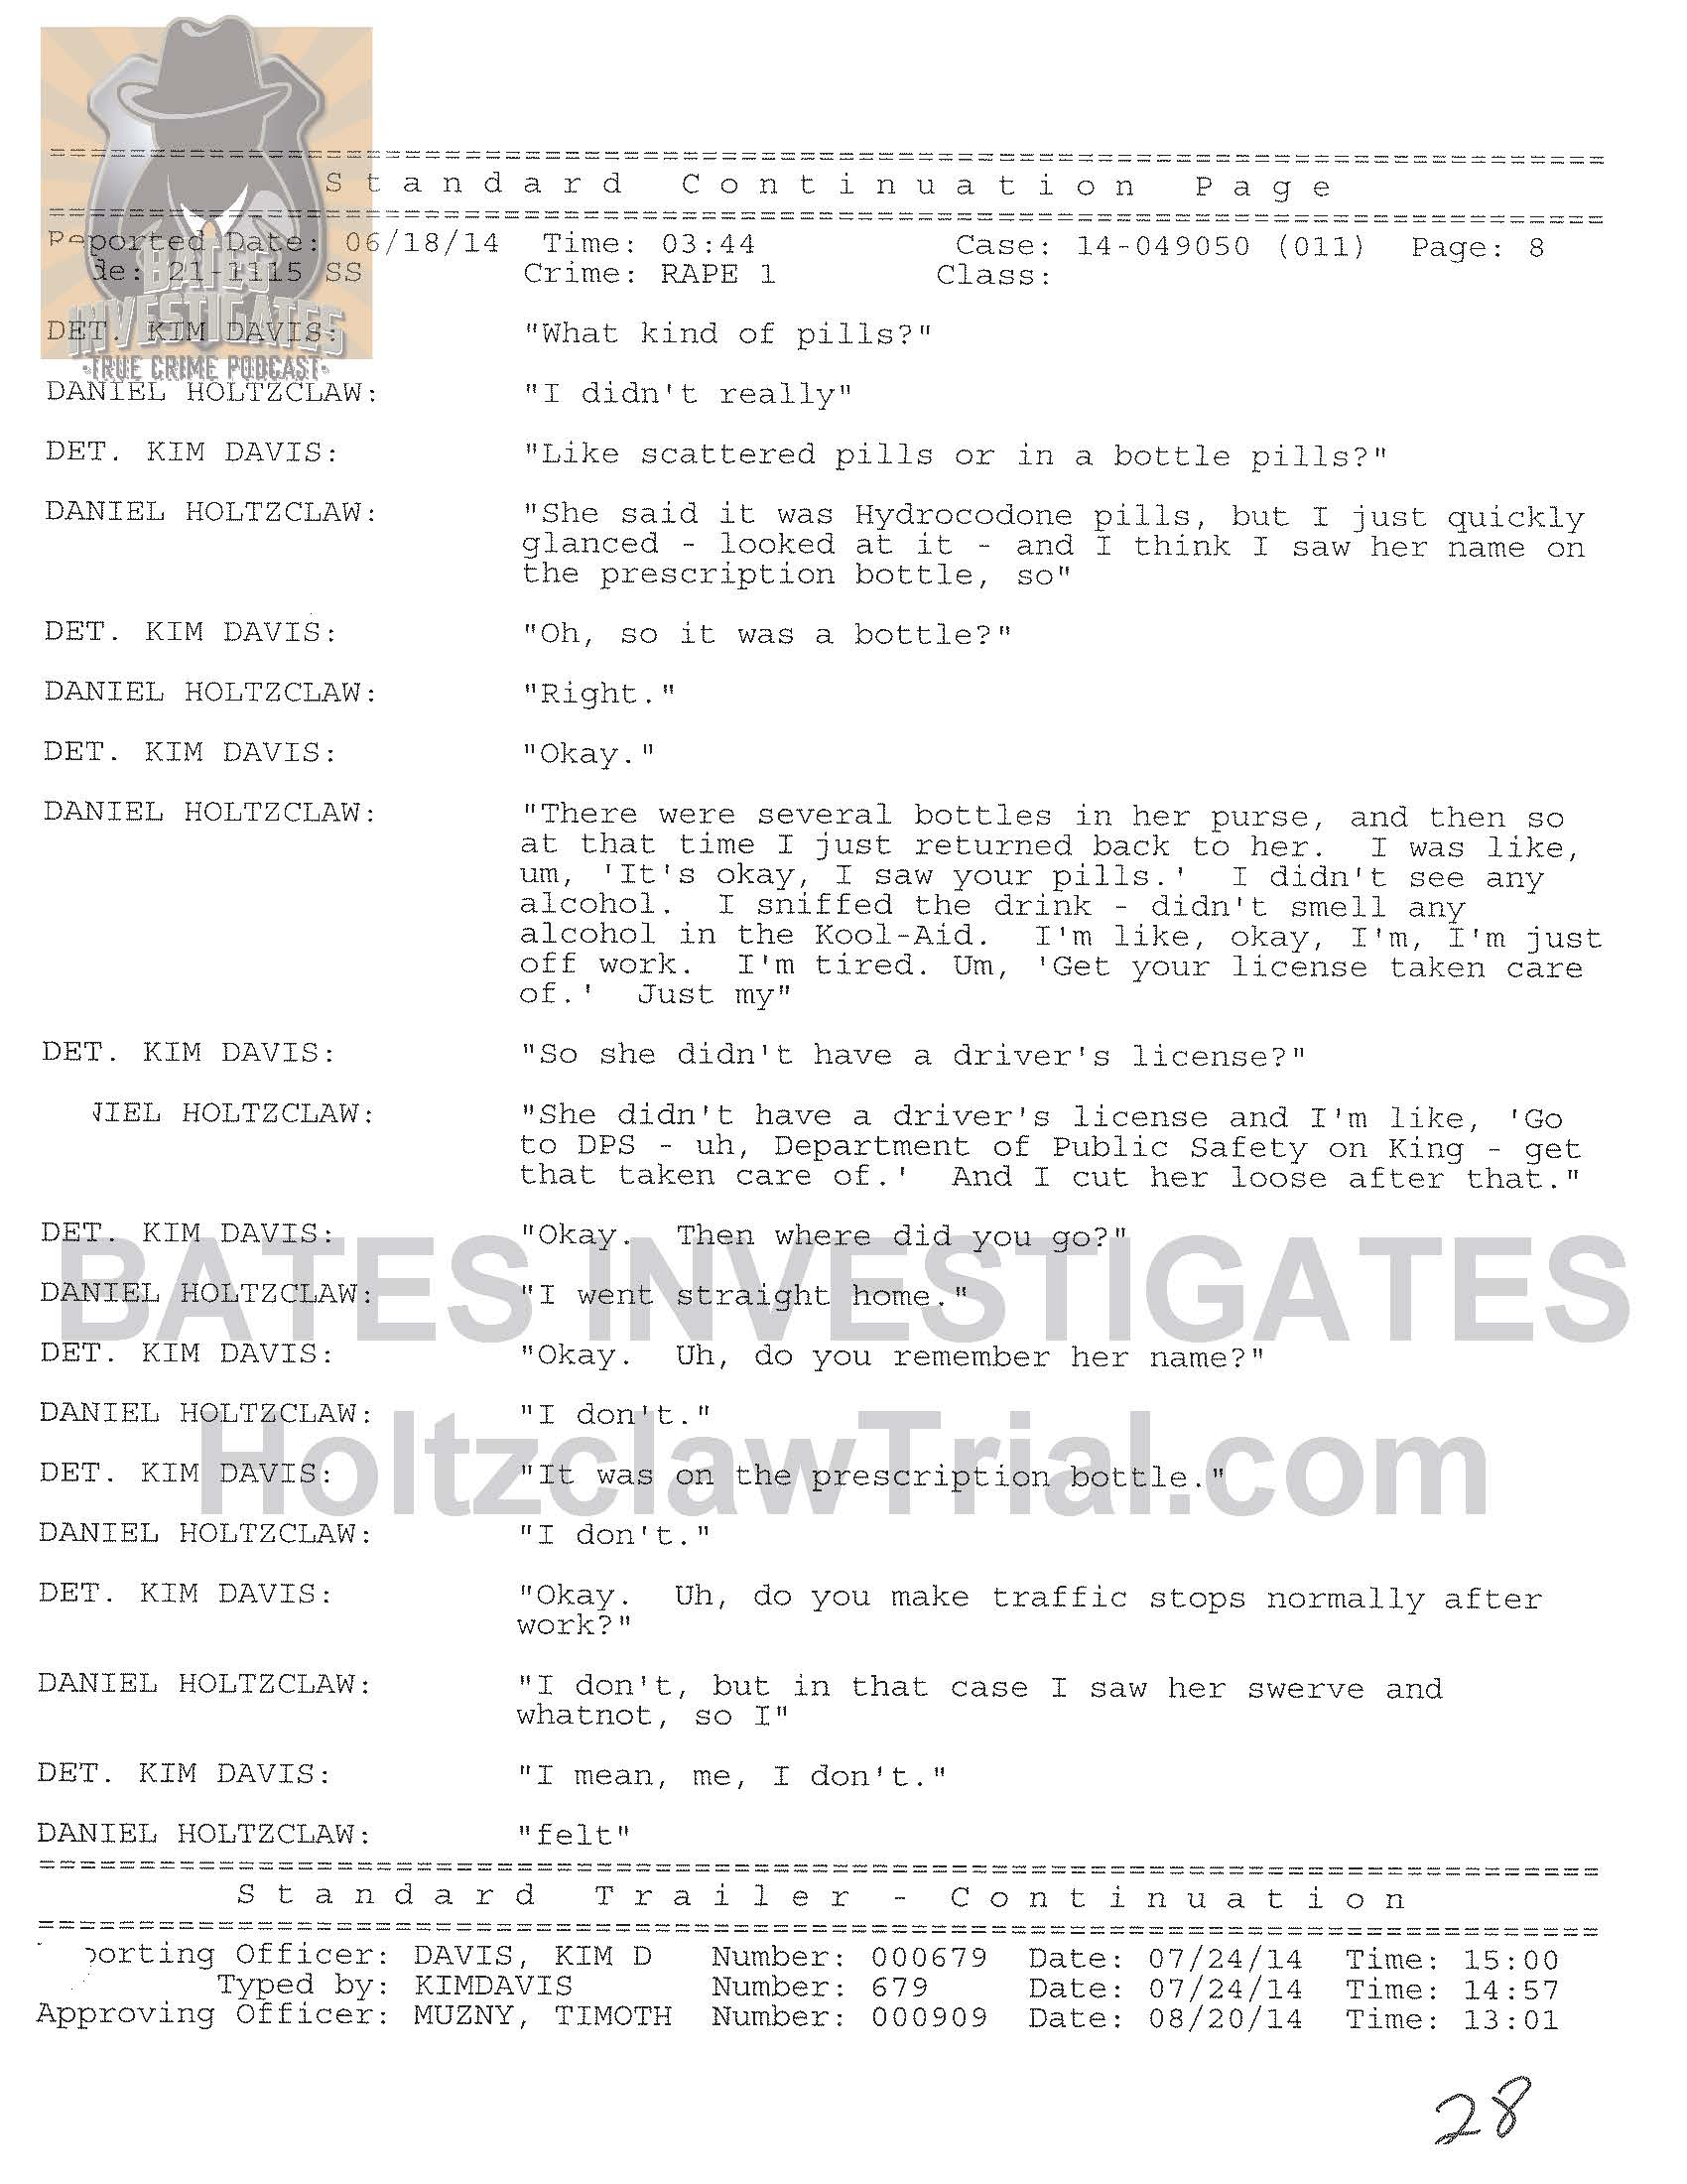 Holtzclaw Interrogation Transcript - Ep02 Redacted_Page_08.jpg